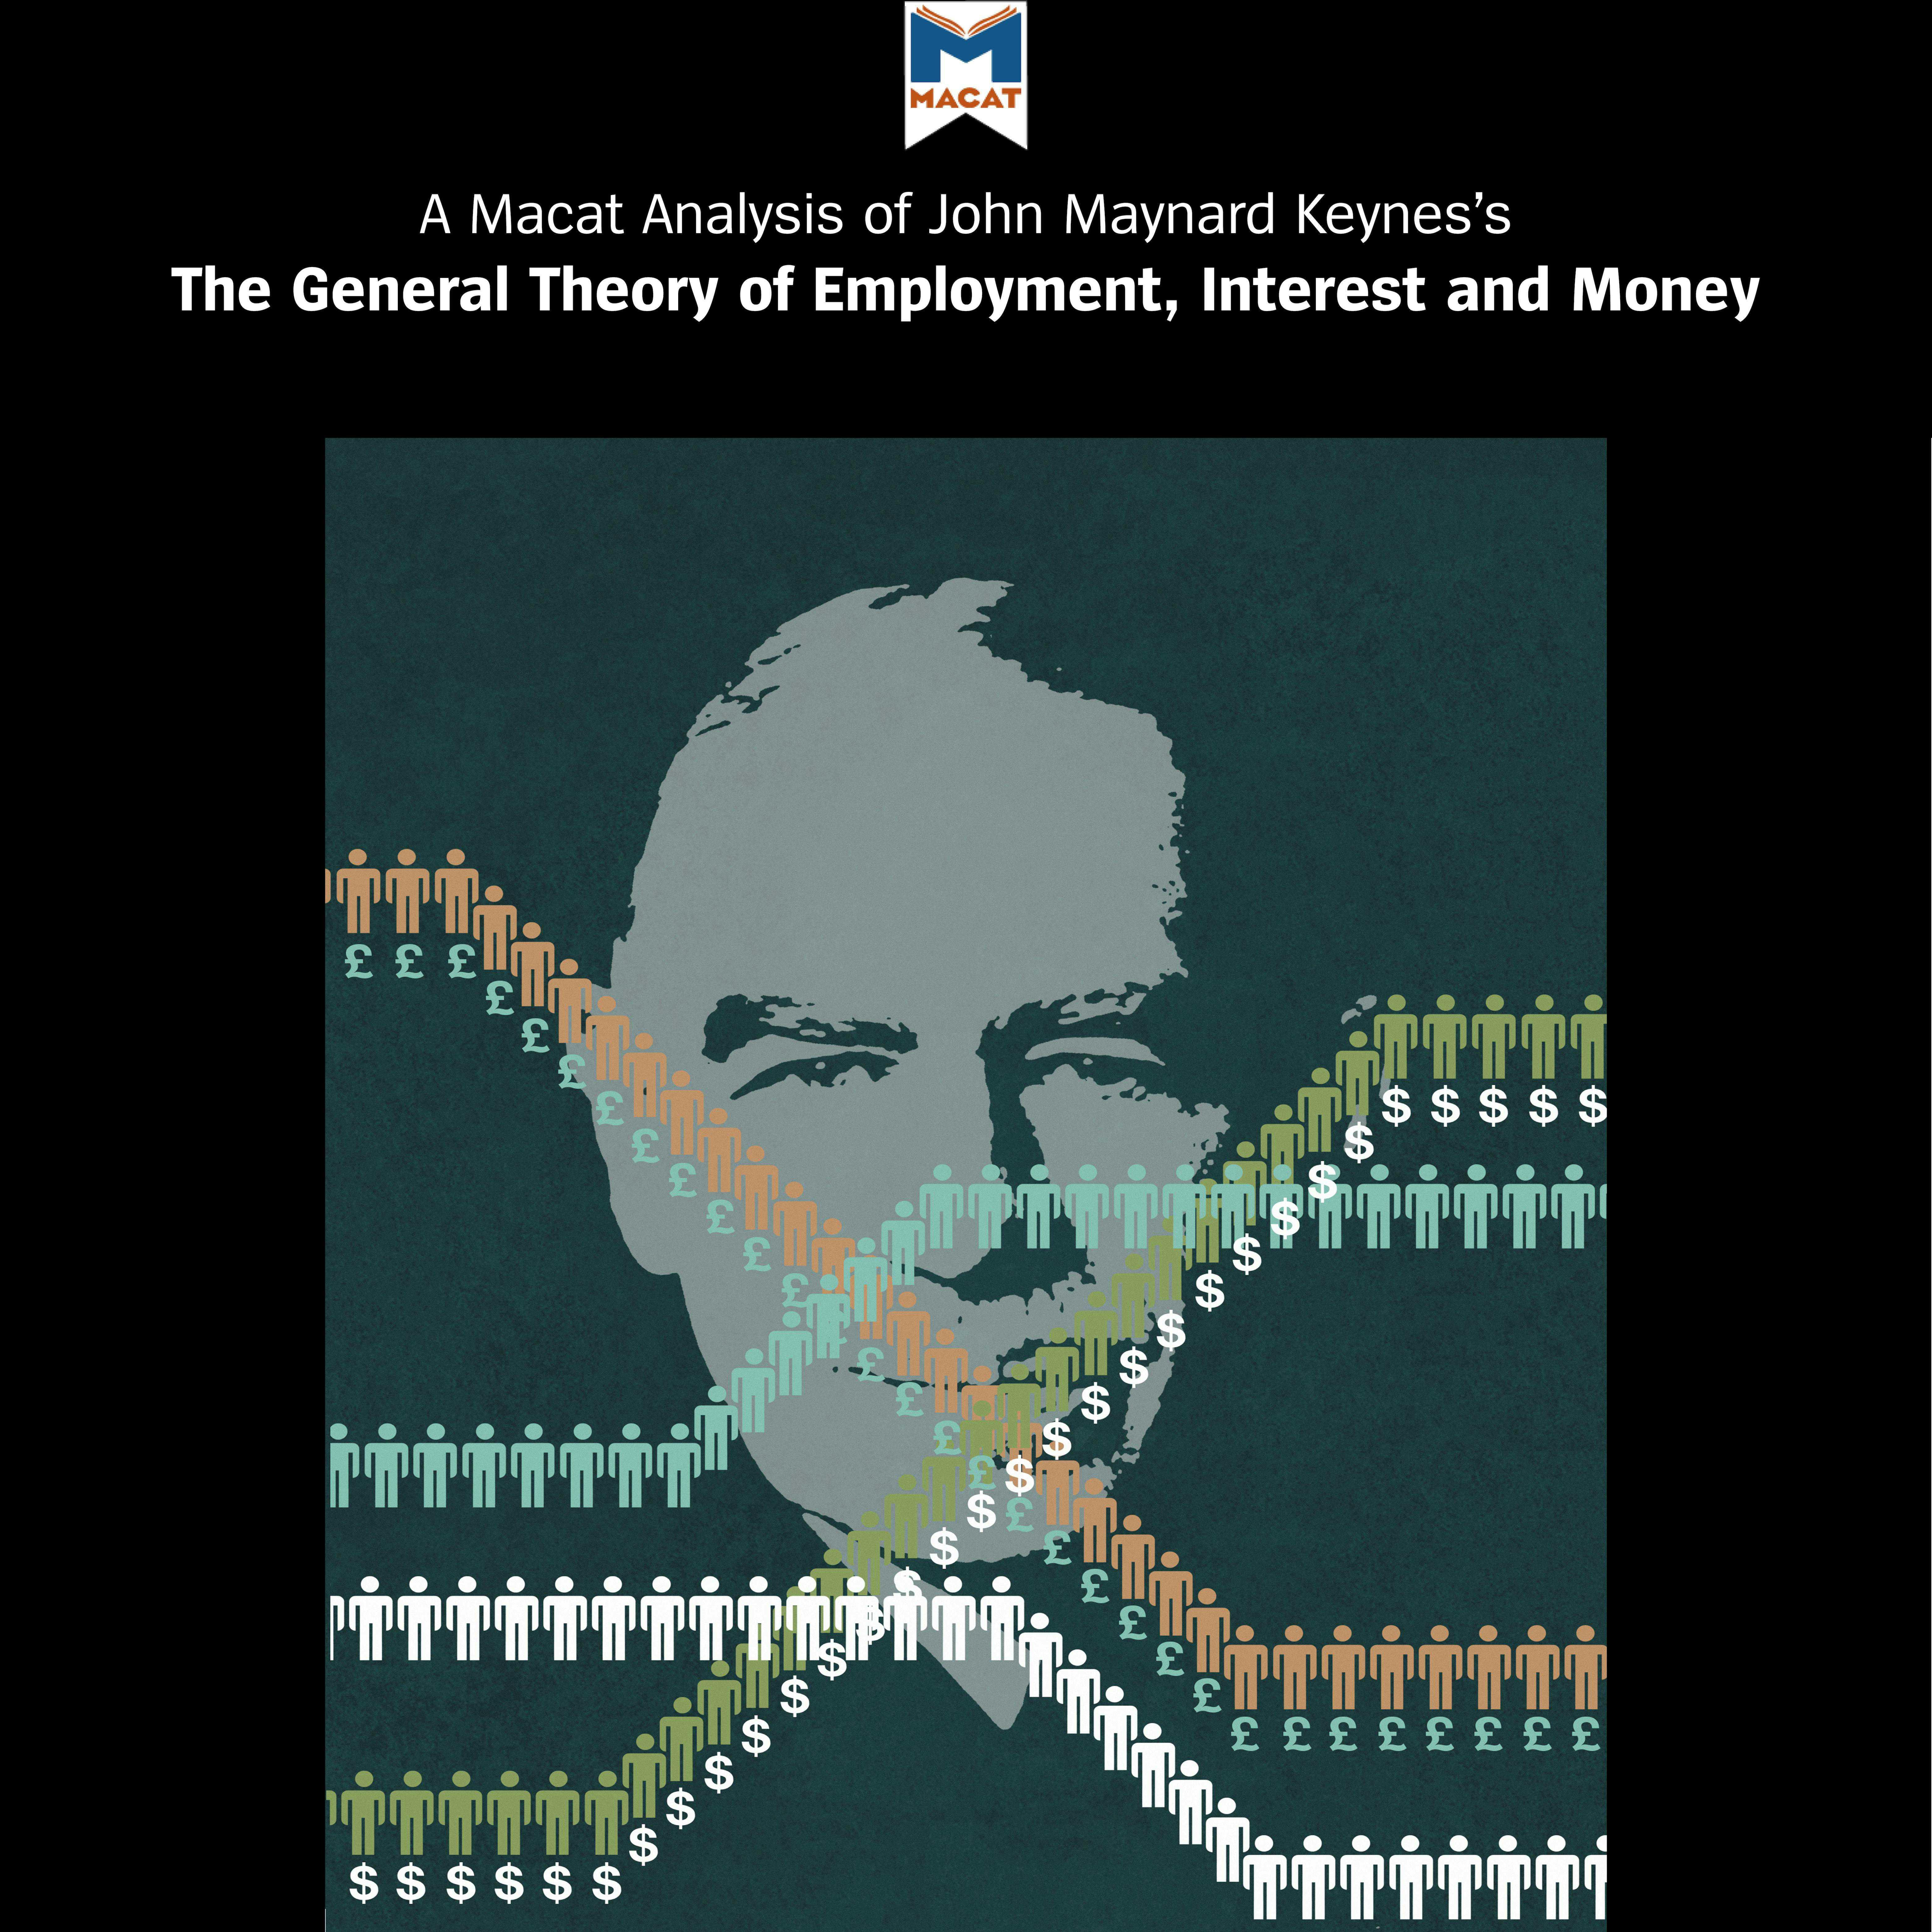 A Macat Analysis of John Maynard Keynes’s The General Theory of Employment, Interest and Money - undefined